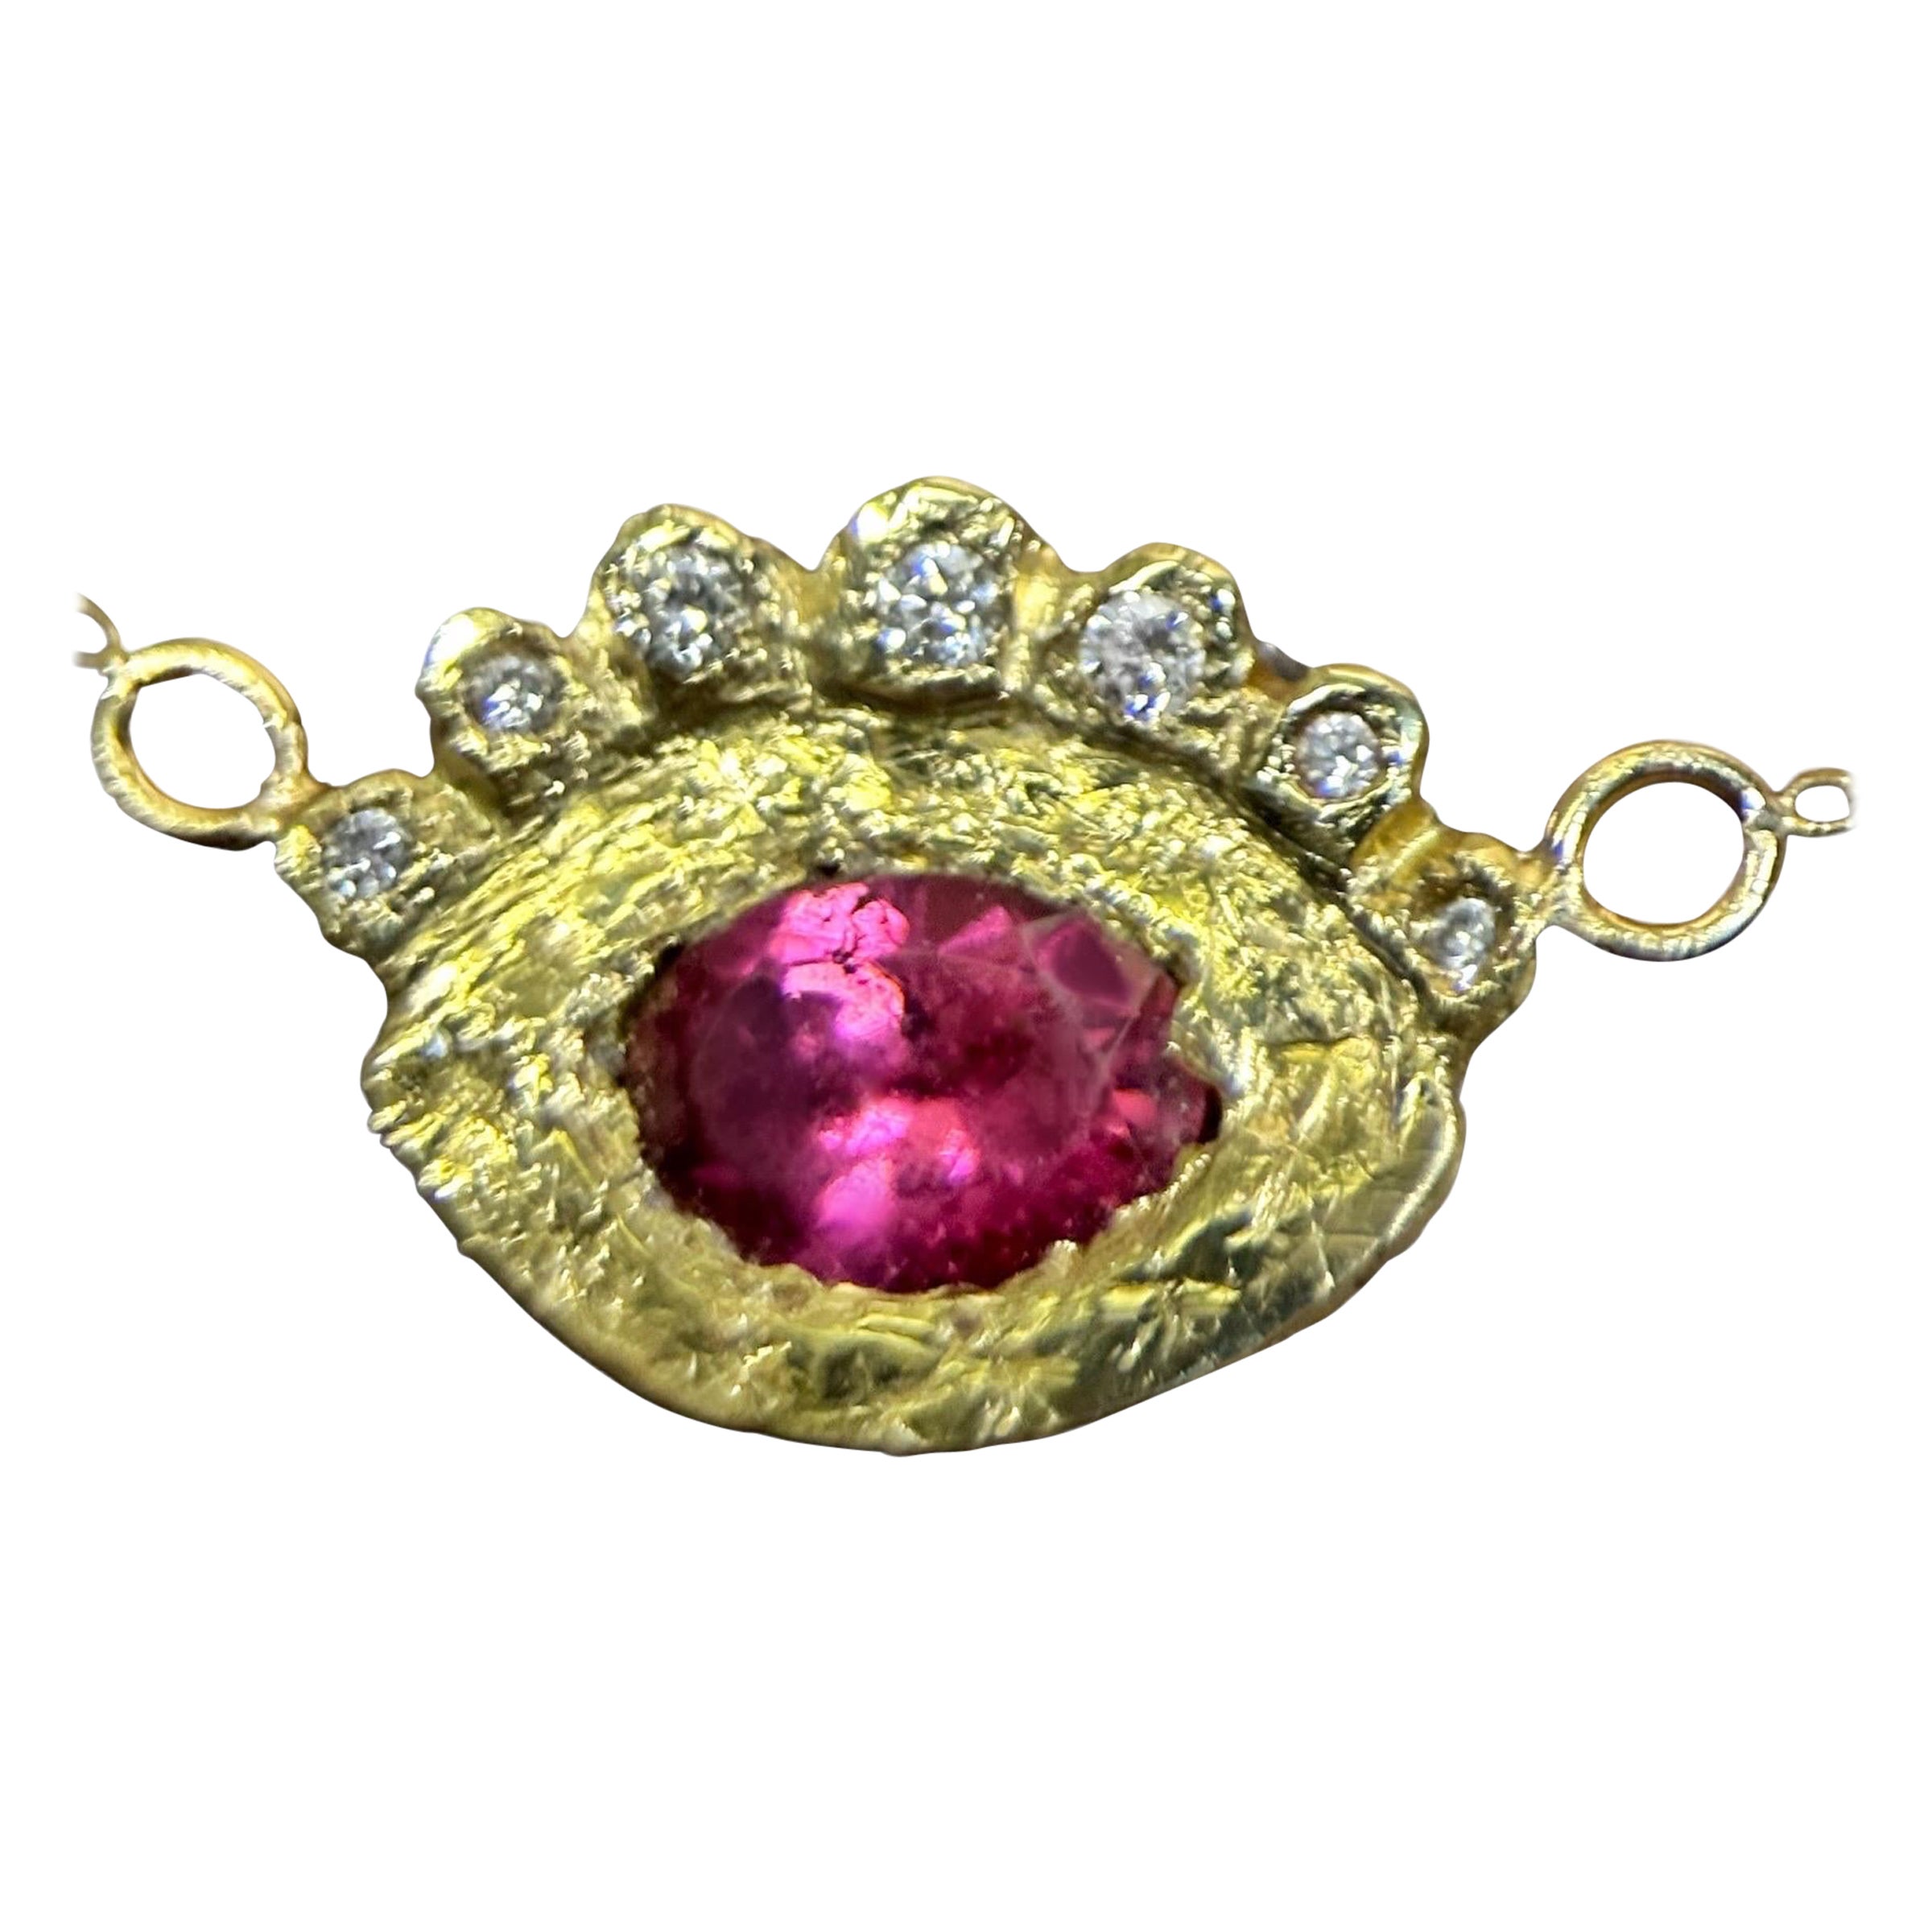 Hera’s Eye Rubellite Tourmaline with Diamonds Necklace in Gold in stock